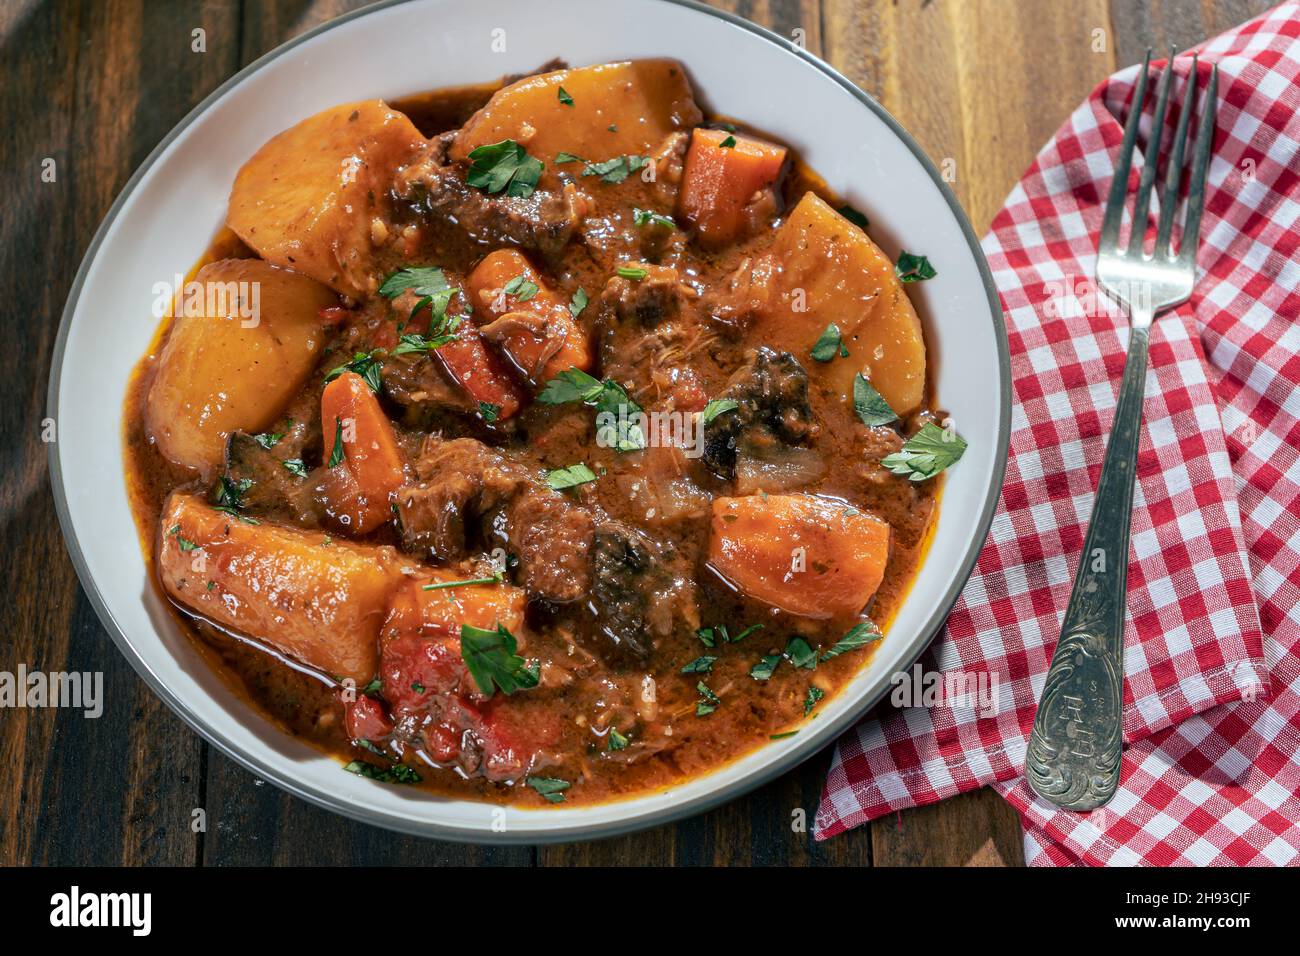 Aerial view of a plate with meat stew, potatoes and vegetables on a wooden table Stock Photo